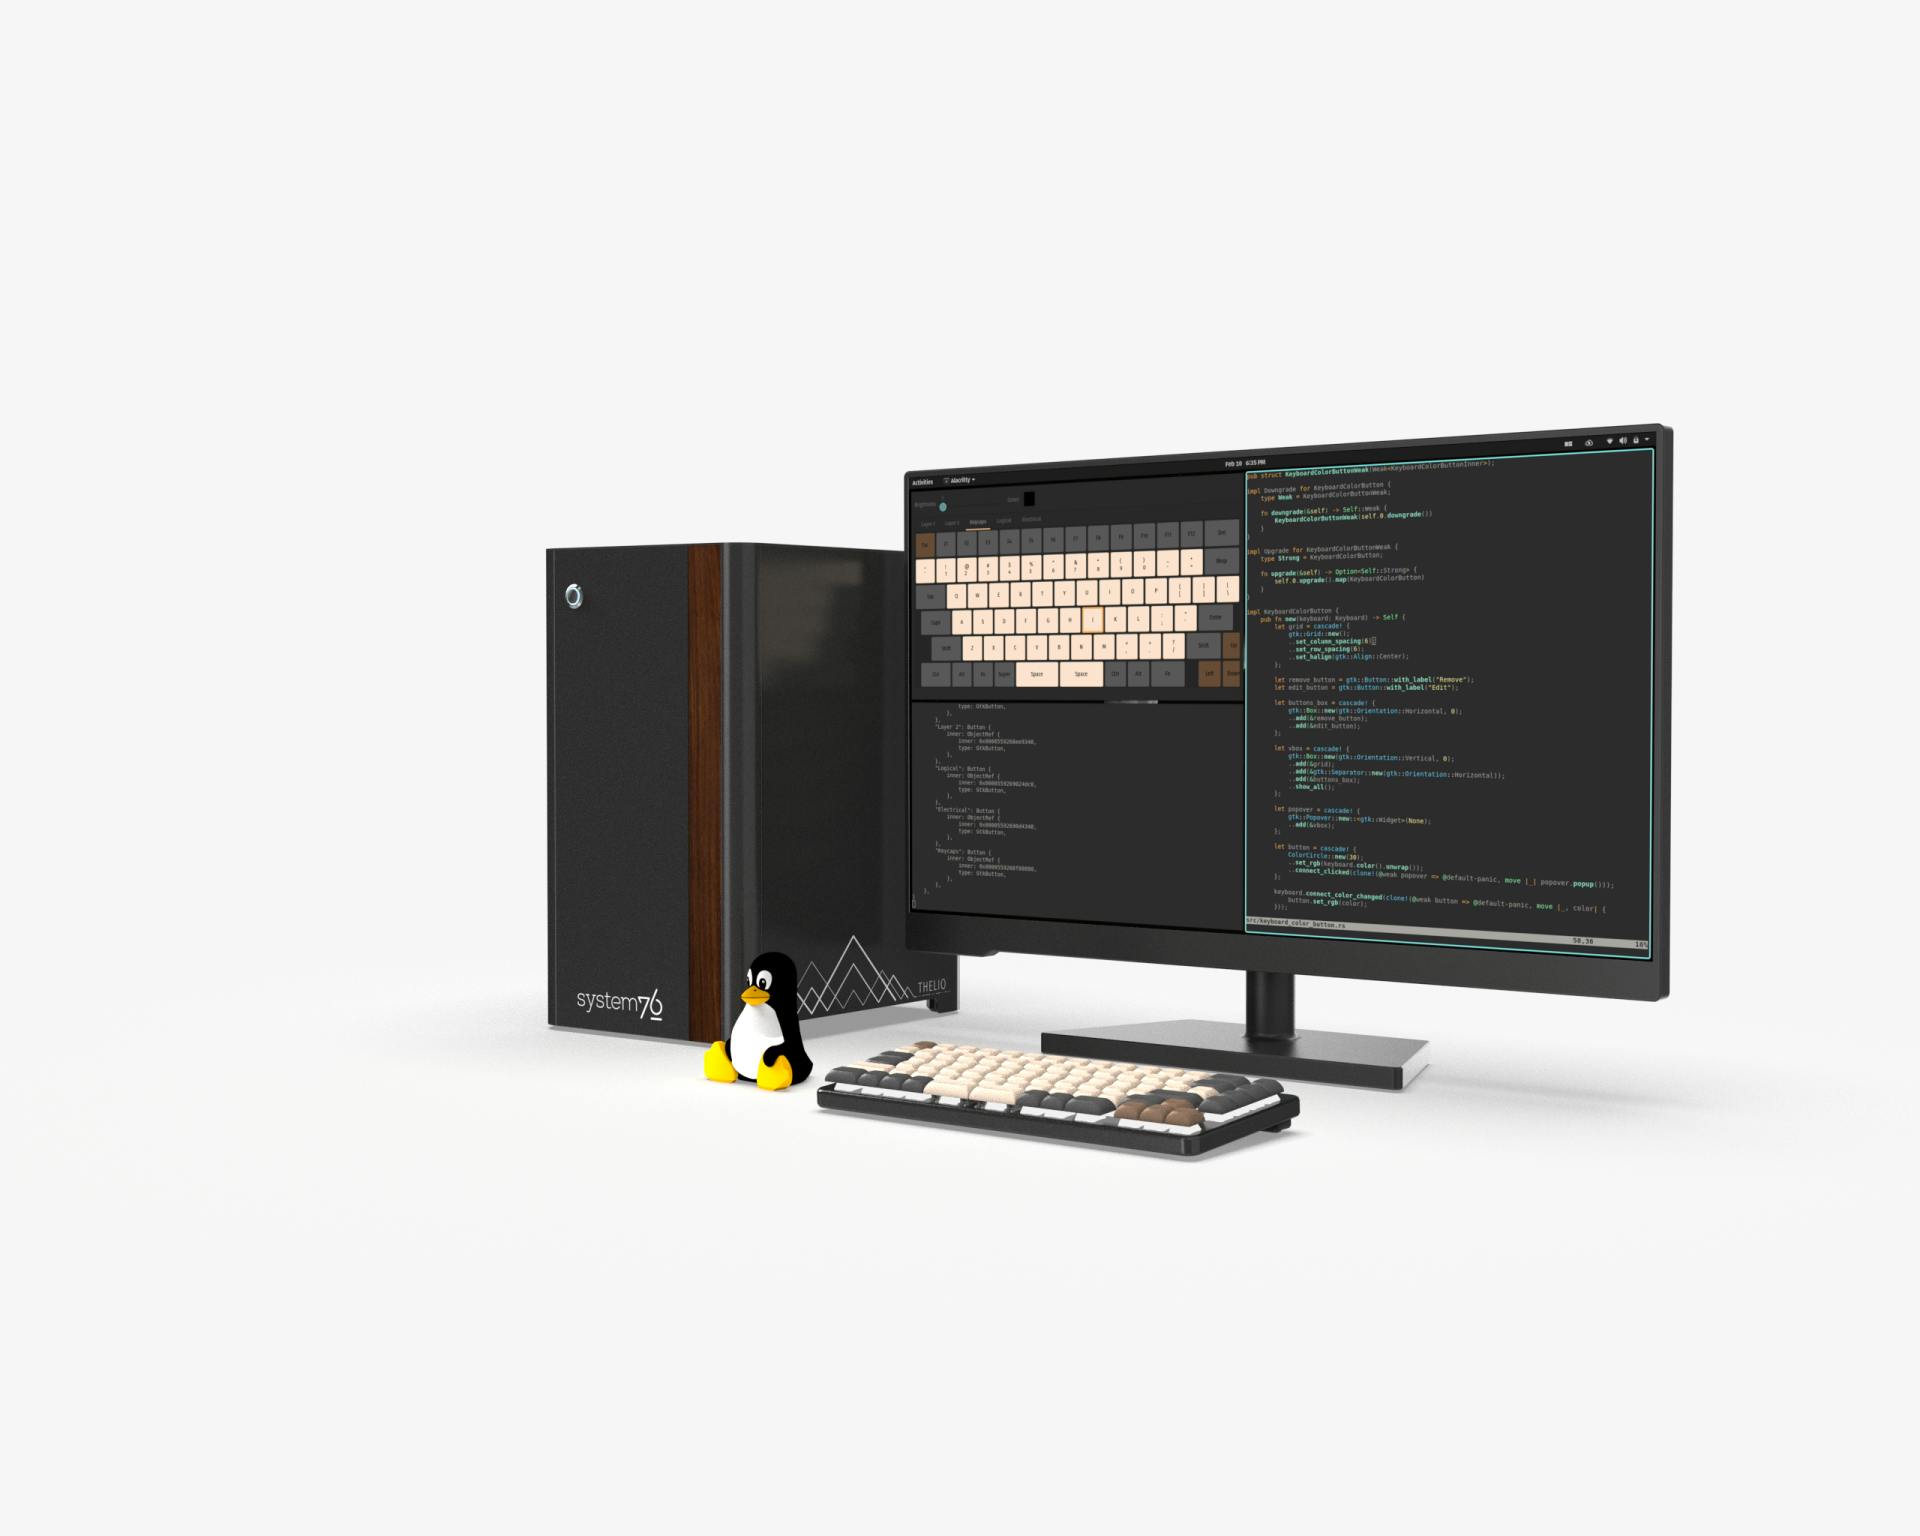 Desk setup with Thelio Mira, Launch keyboard, and a monitor with keyboard configurator application running